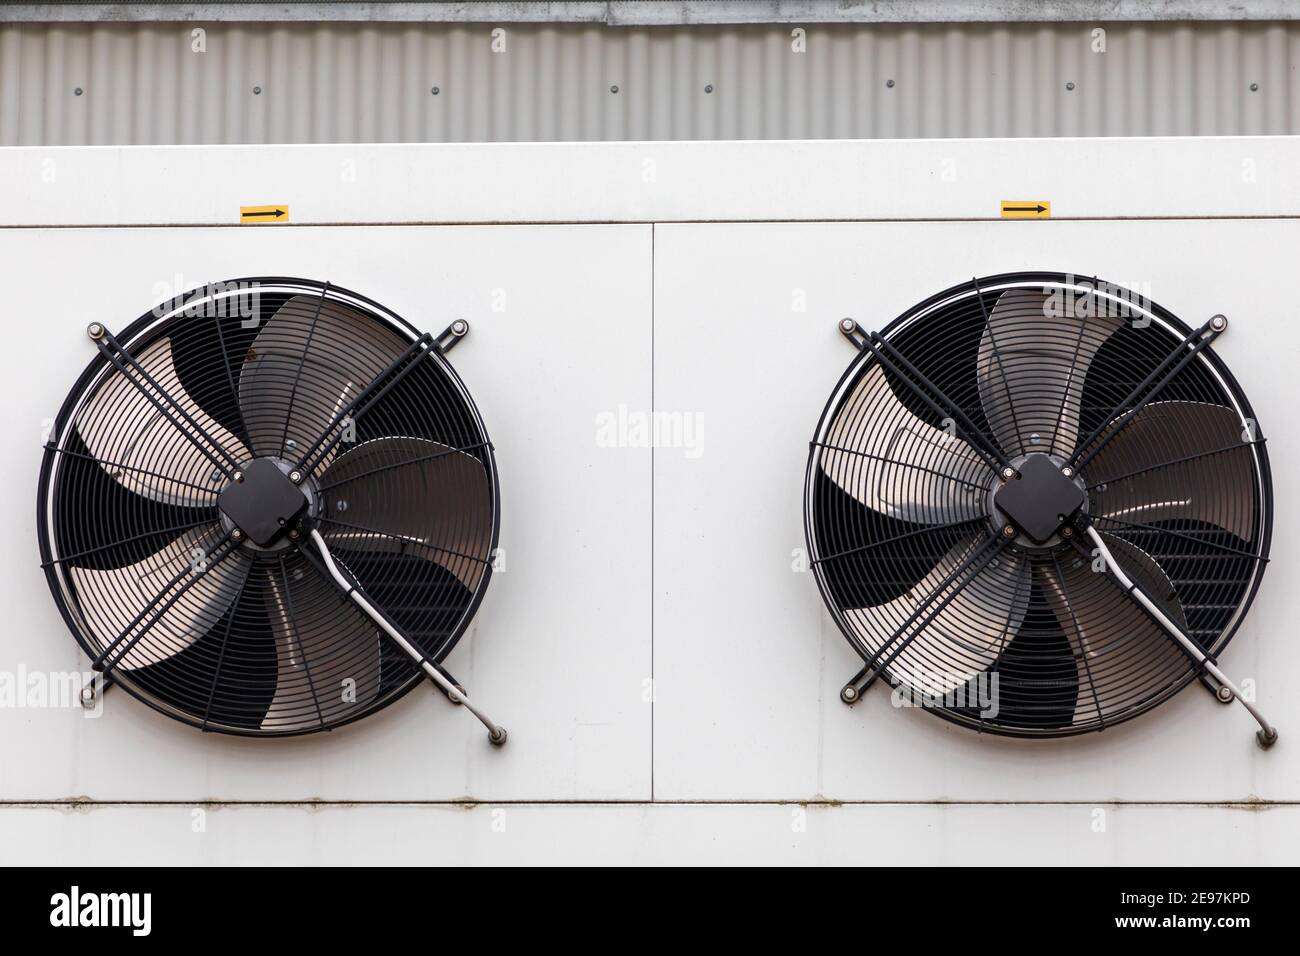 Ventilator of an air conditioner Stock Photo